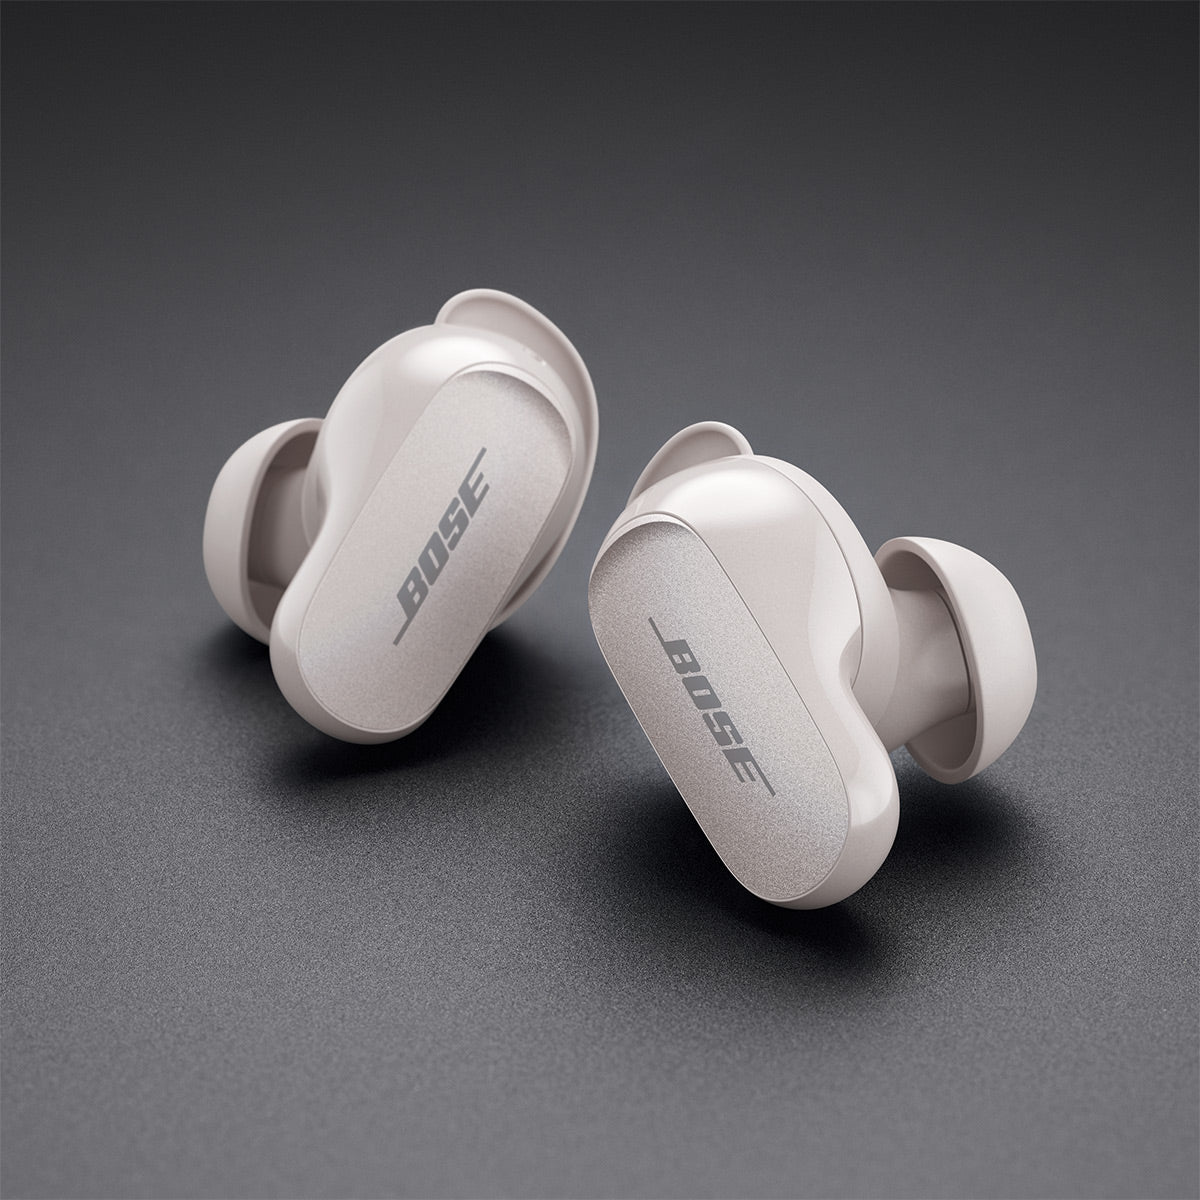 Bose Quiet comfort earbuds II ホワイト - イヤフォン